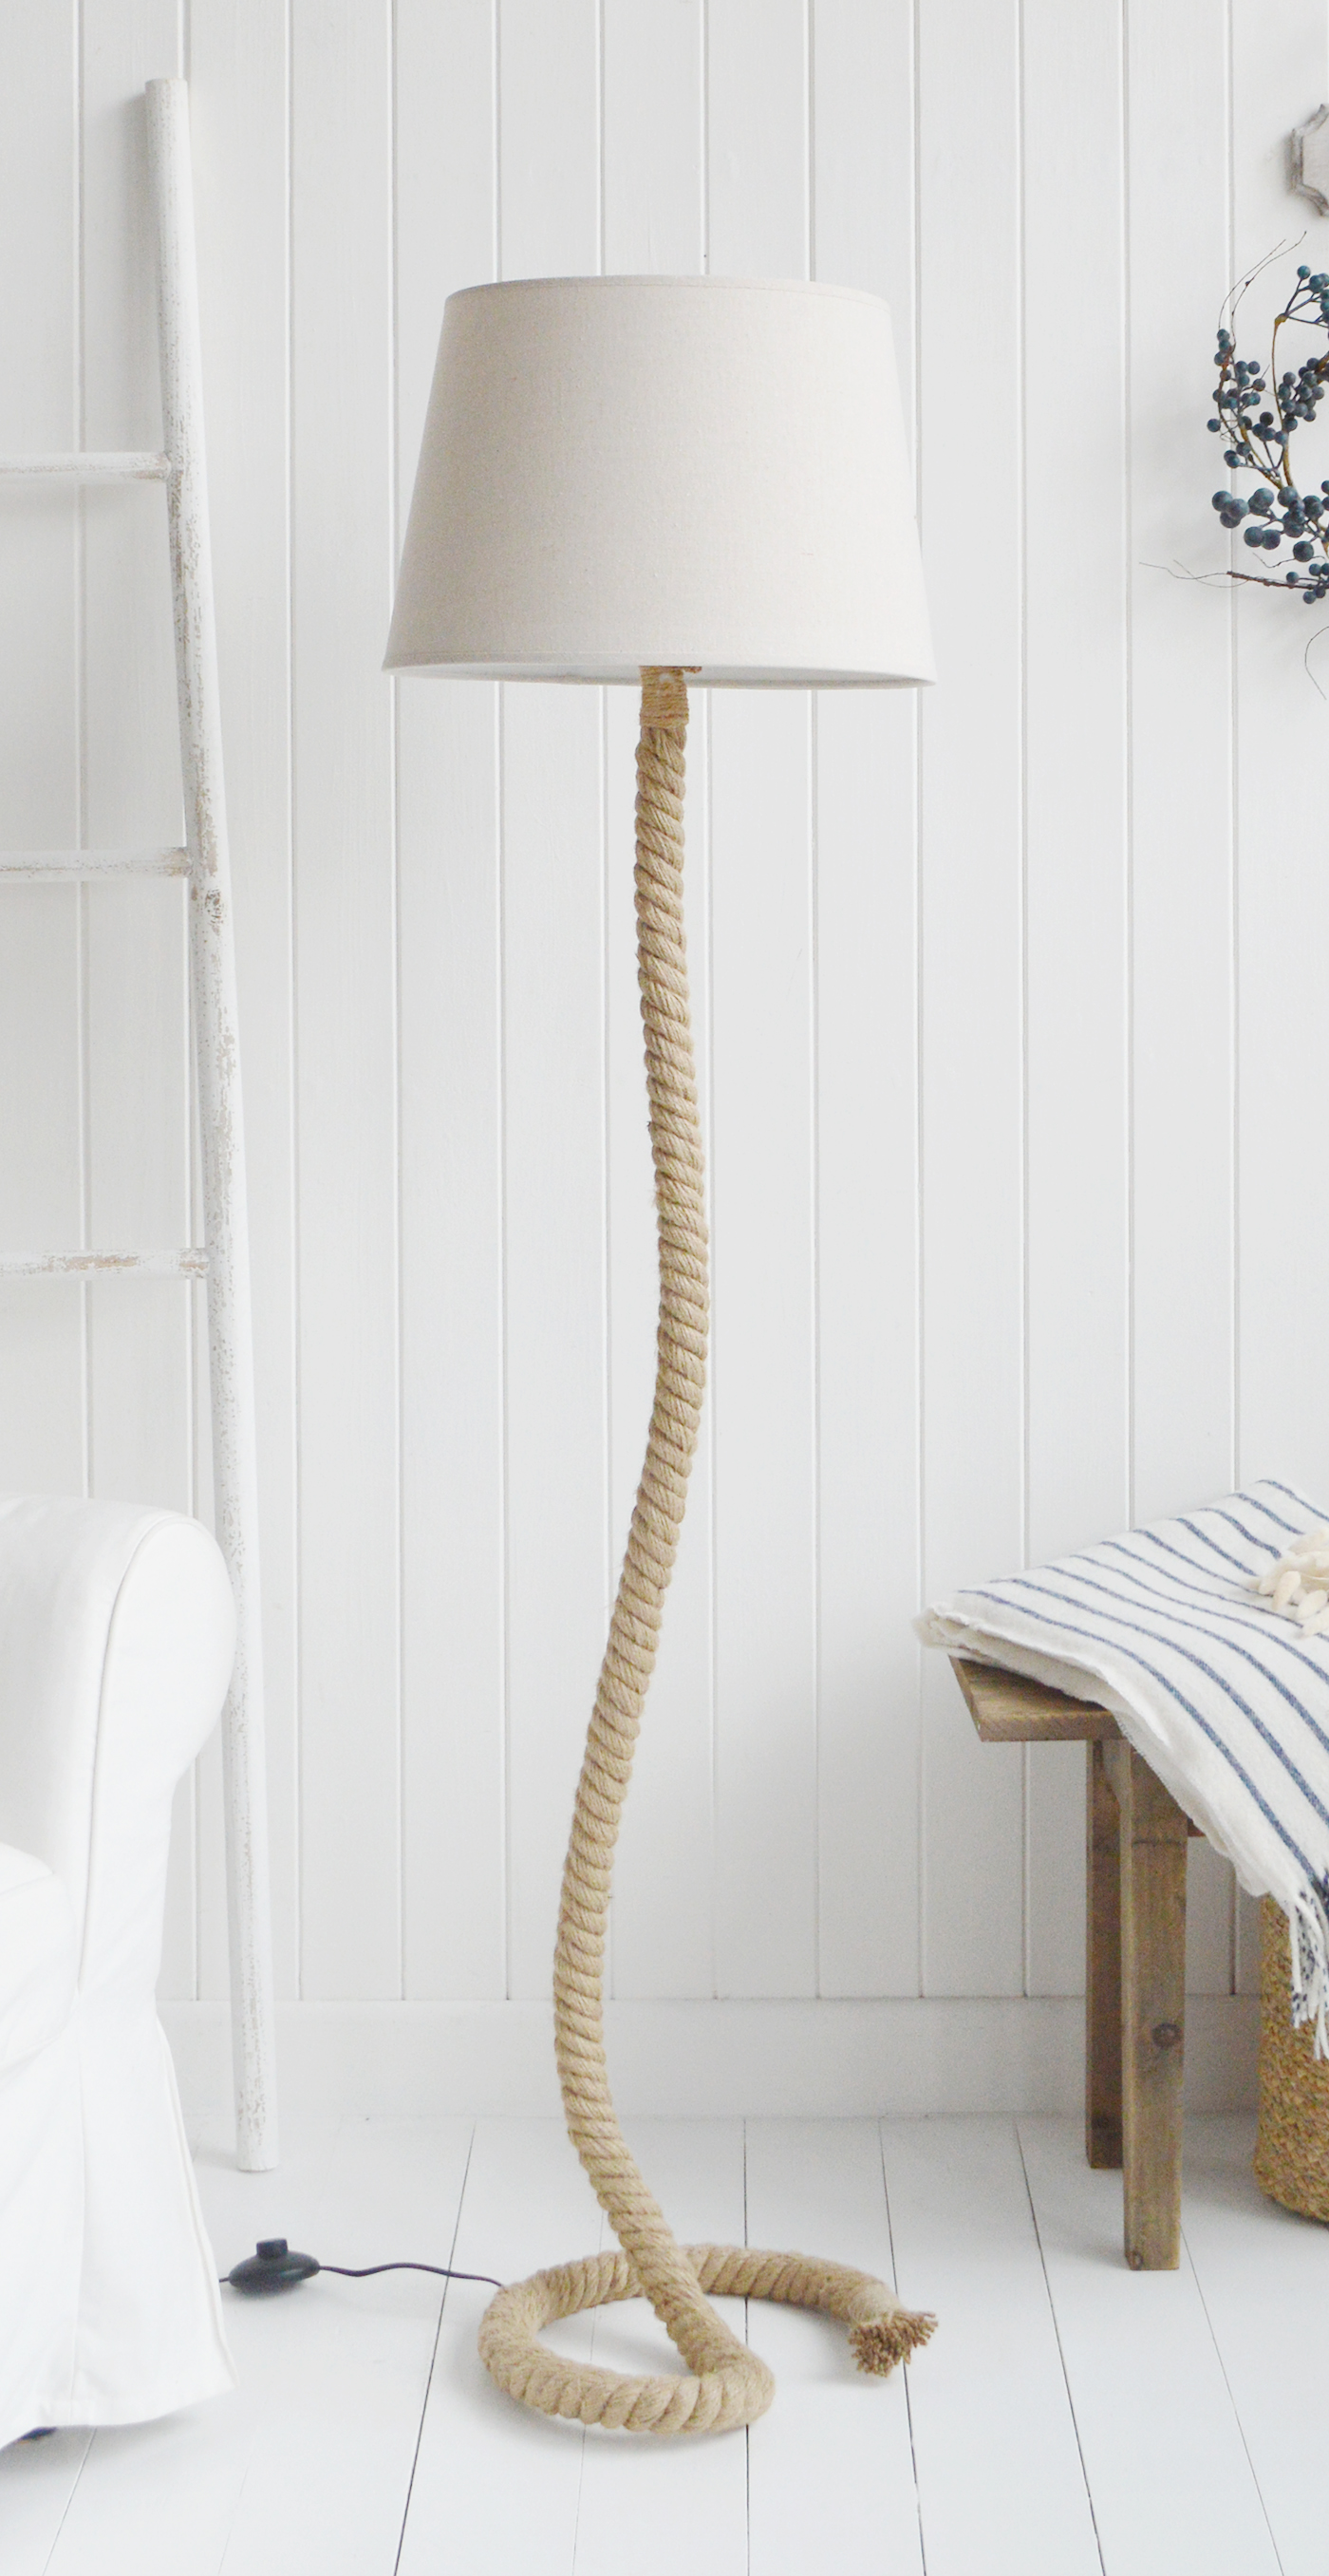 Rope Coastal Floor lamp  from The White Lighthouse Furniture. A lovely floor lamp the bedroom or living room. New England furniture and interiors for coastal, country and city homes